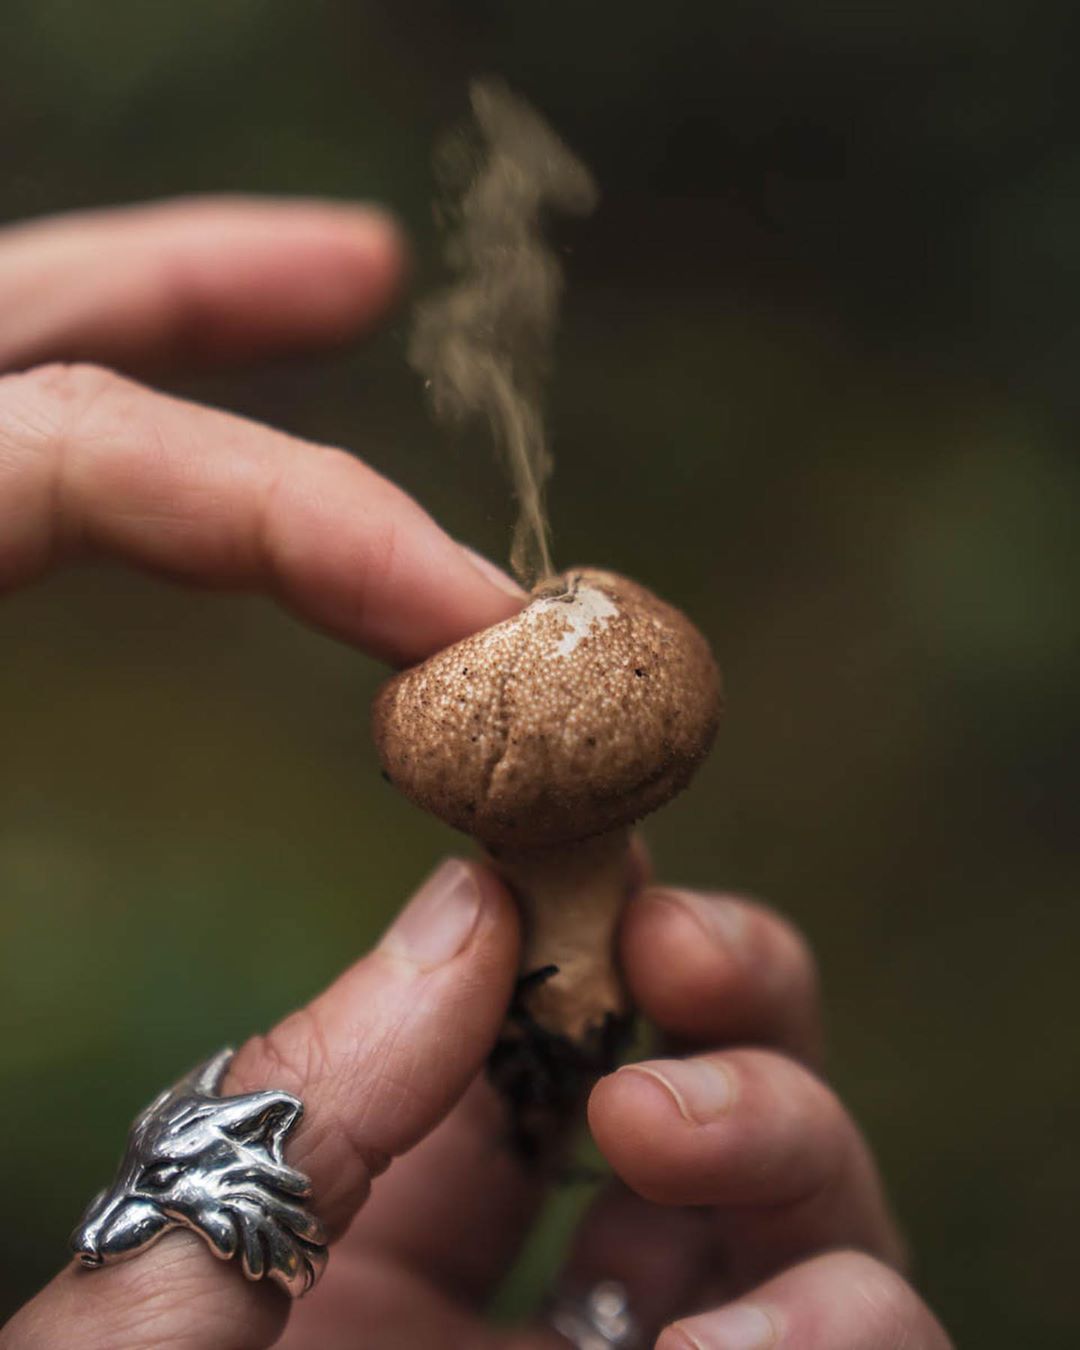 Part of a hand wearing a silver wolf motif ring visible holding a mushroom. The pointer finger is pressing down on the centre of the mushroom and a tendril of smoke is rising from the centre of the mushroom, comprised of mushroom spores